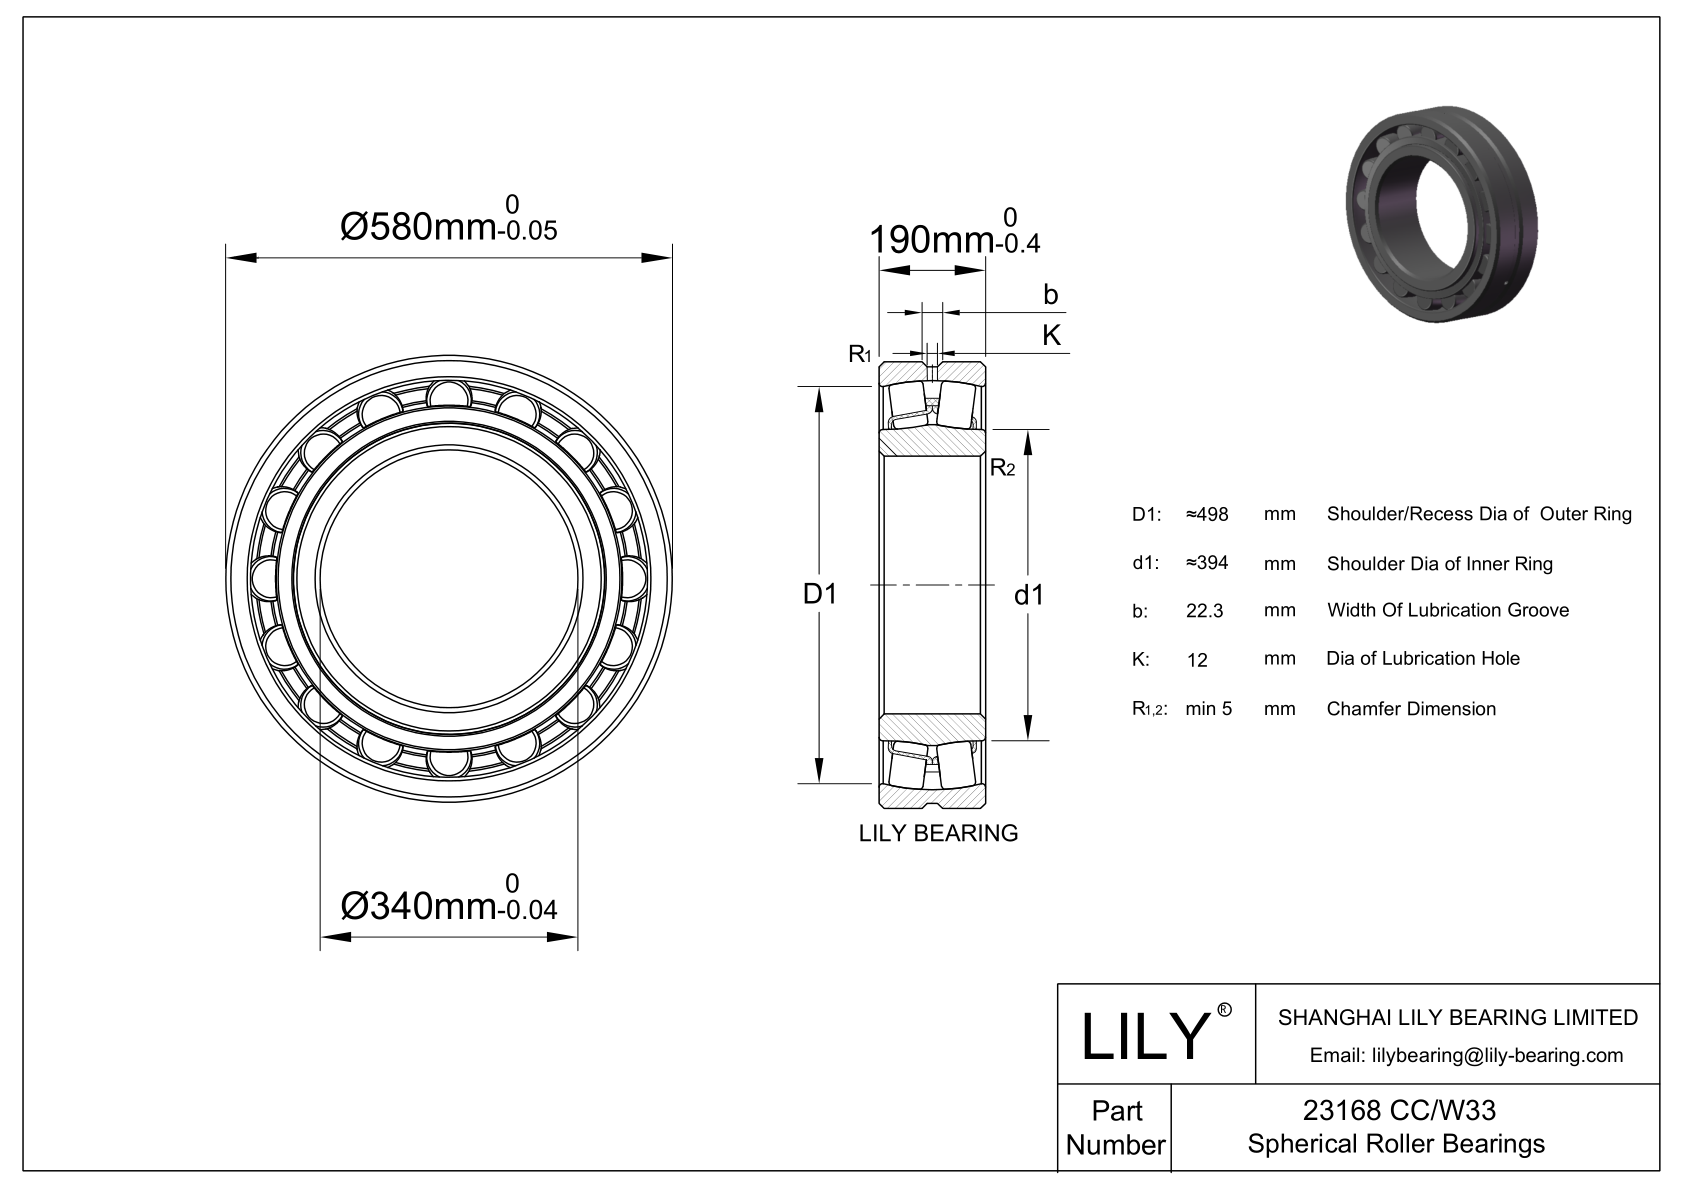 23168 CC/W33 Double Row Spherical Roller Bearing cad drawing